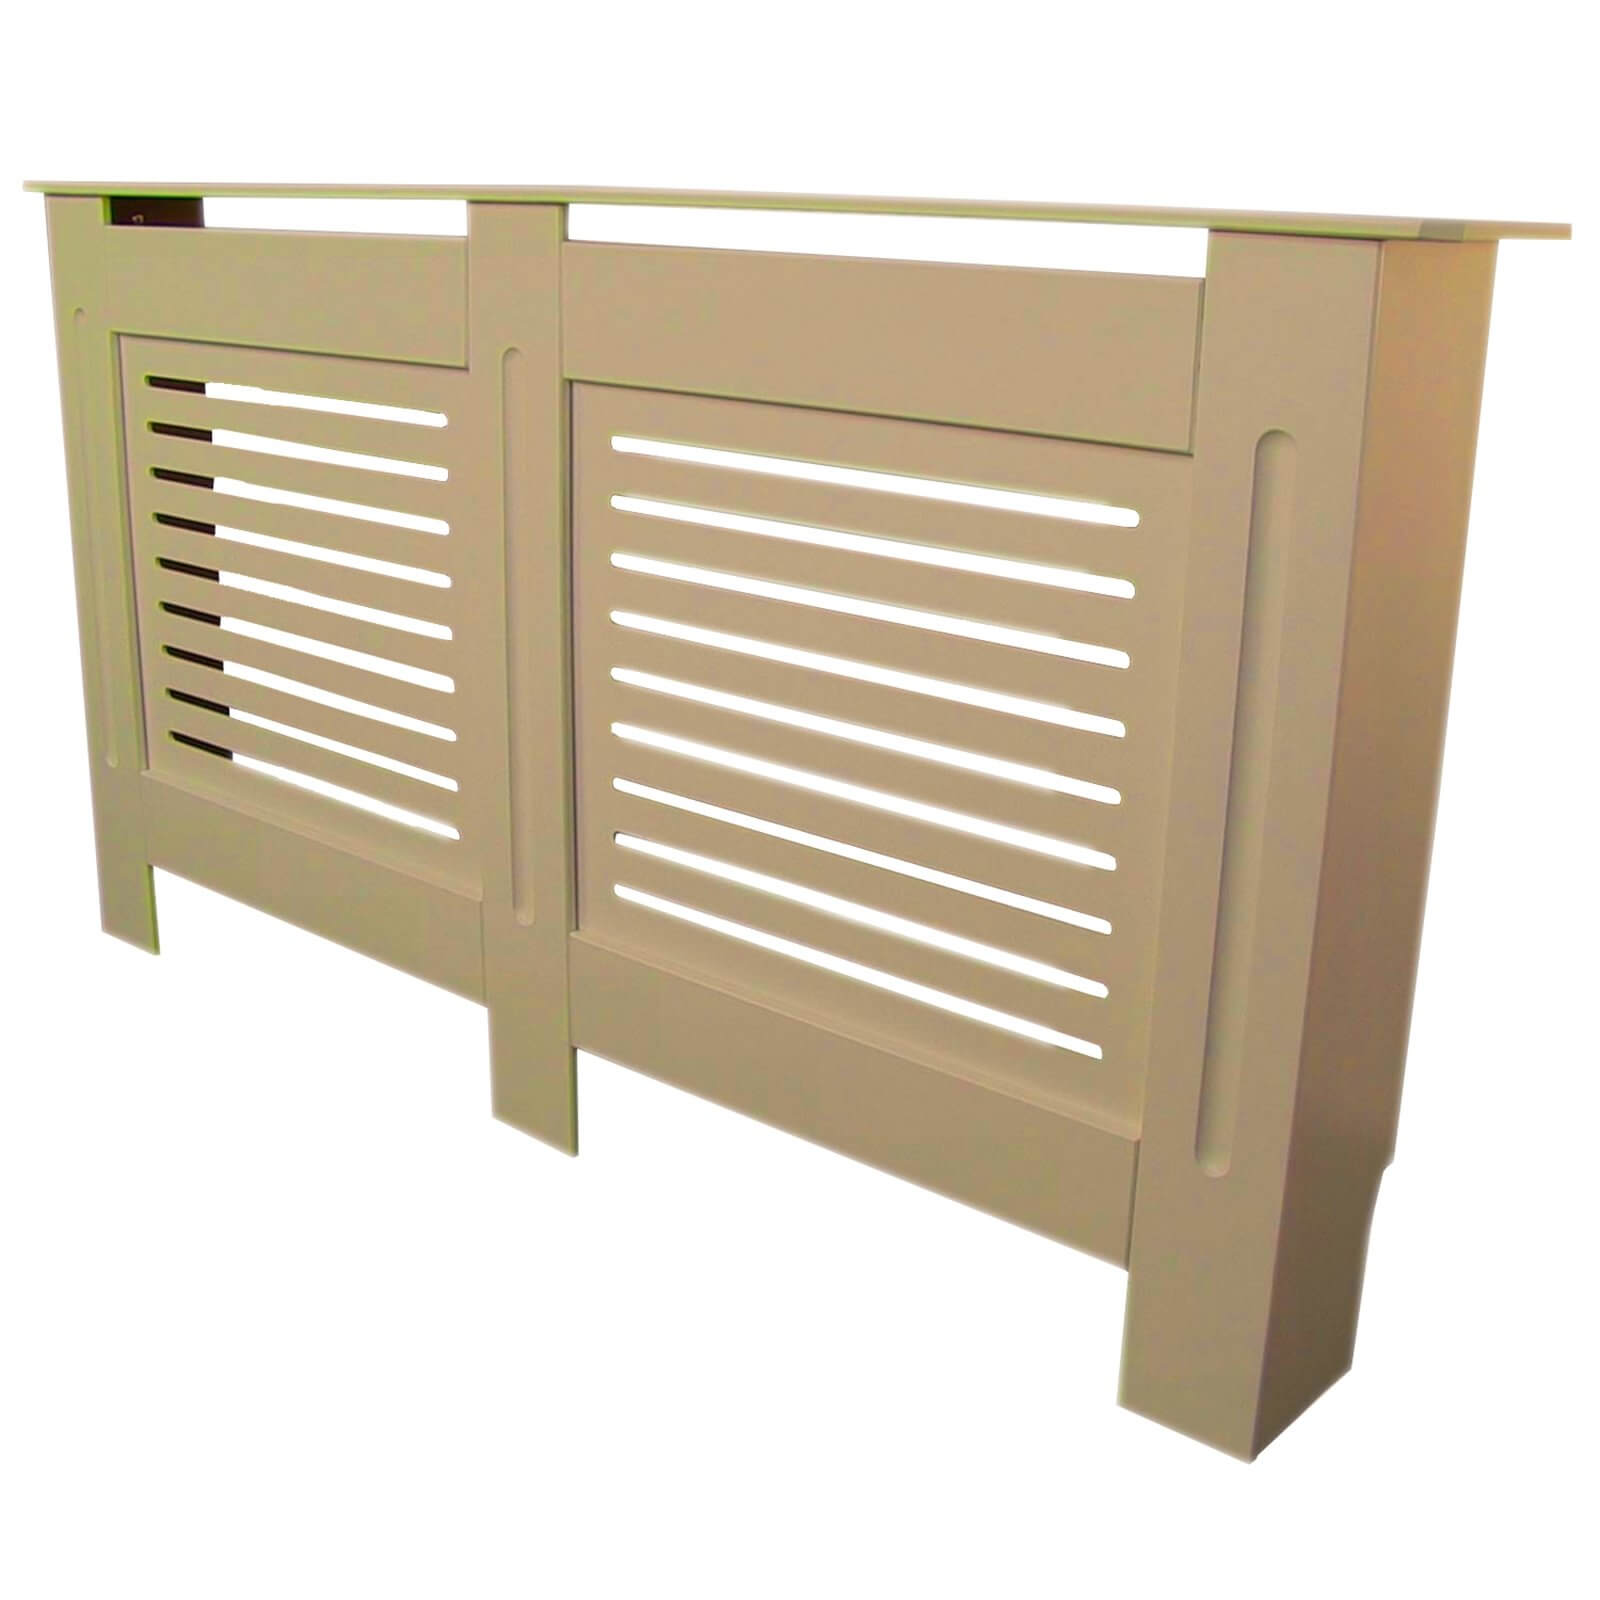 Radiator Cover with Horizontal Slatted Design in Unpainted - Extra Large